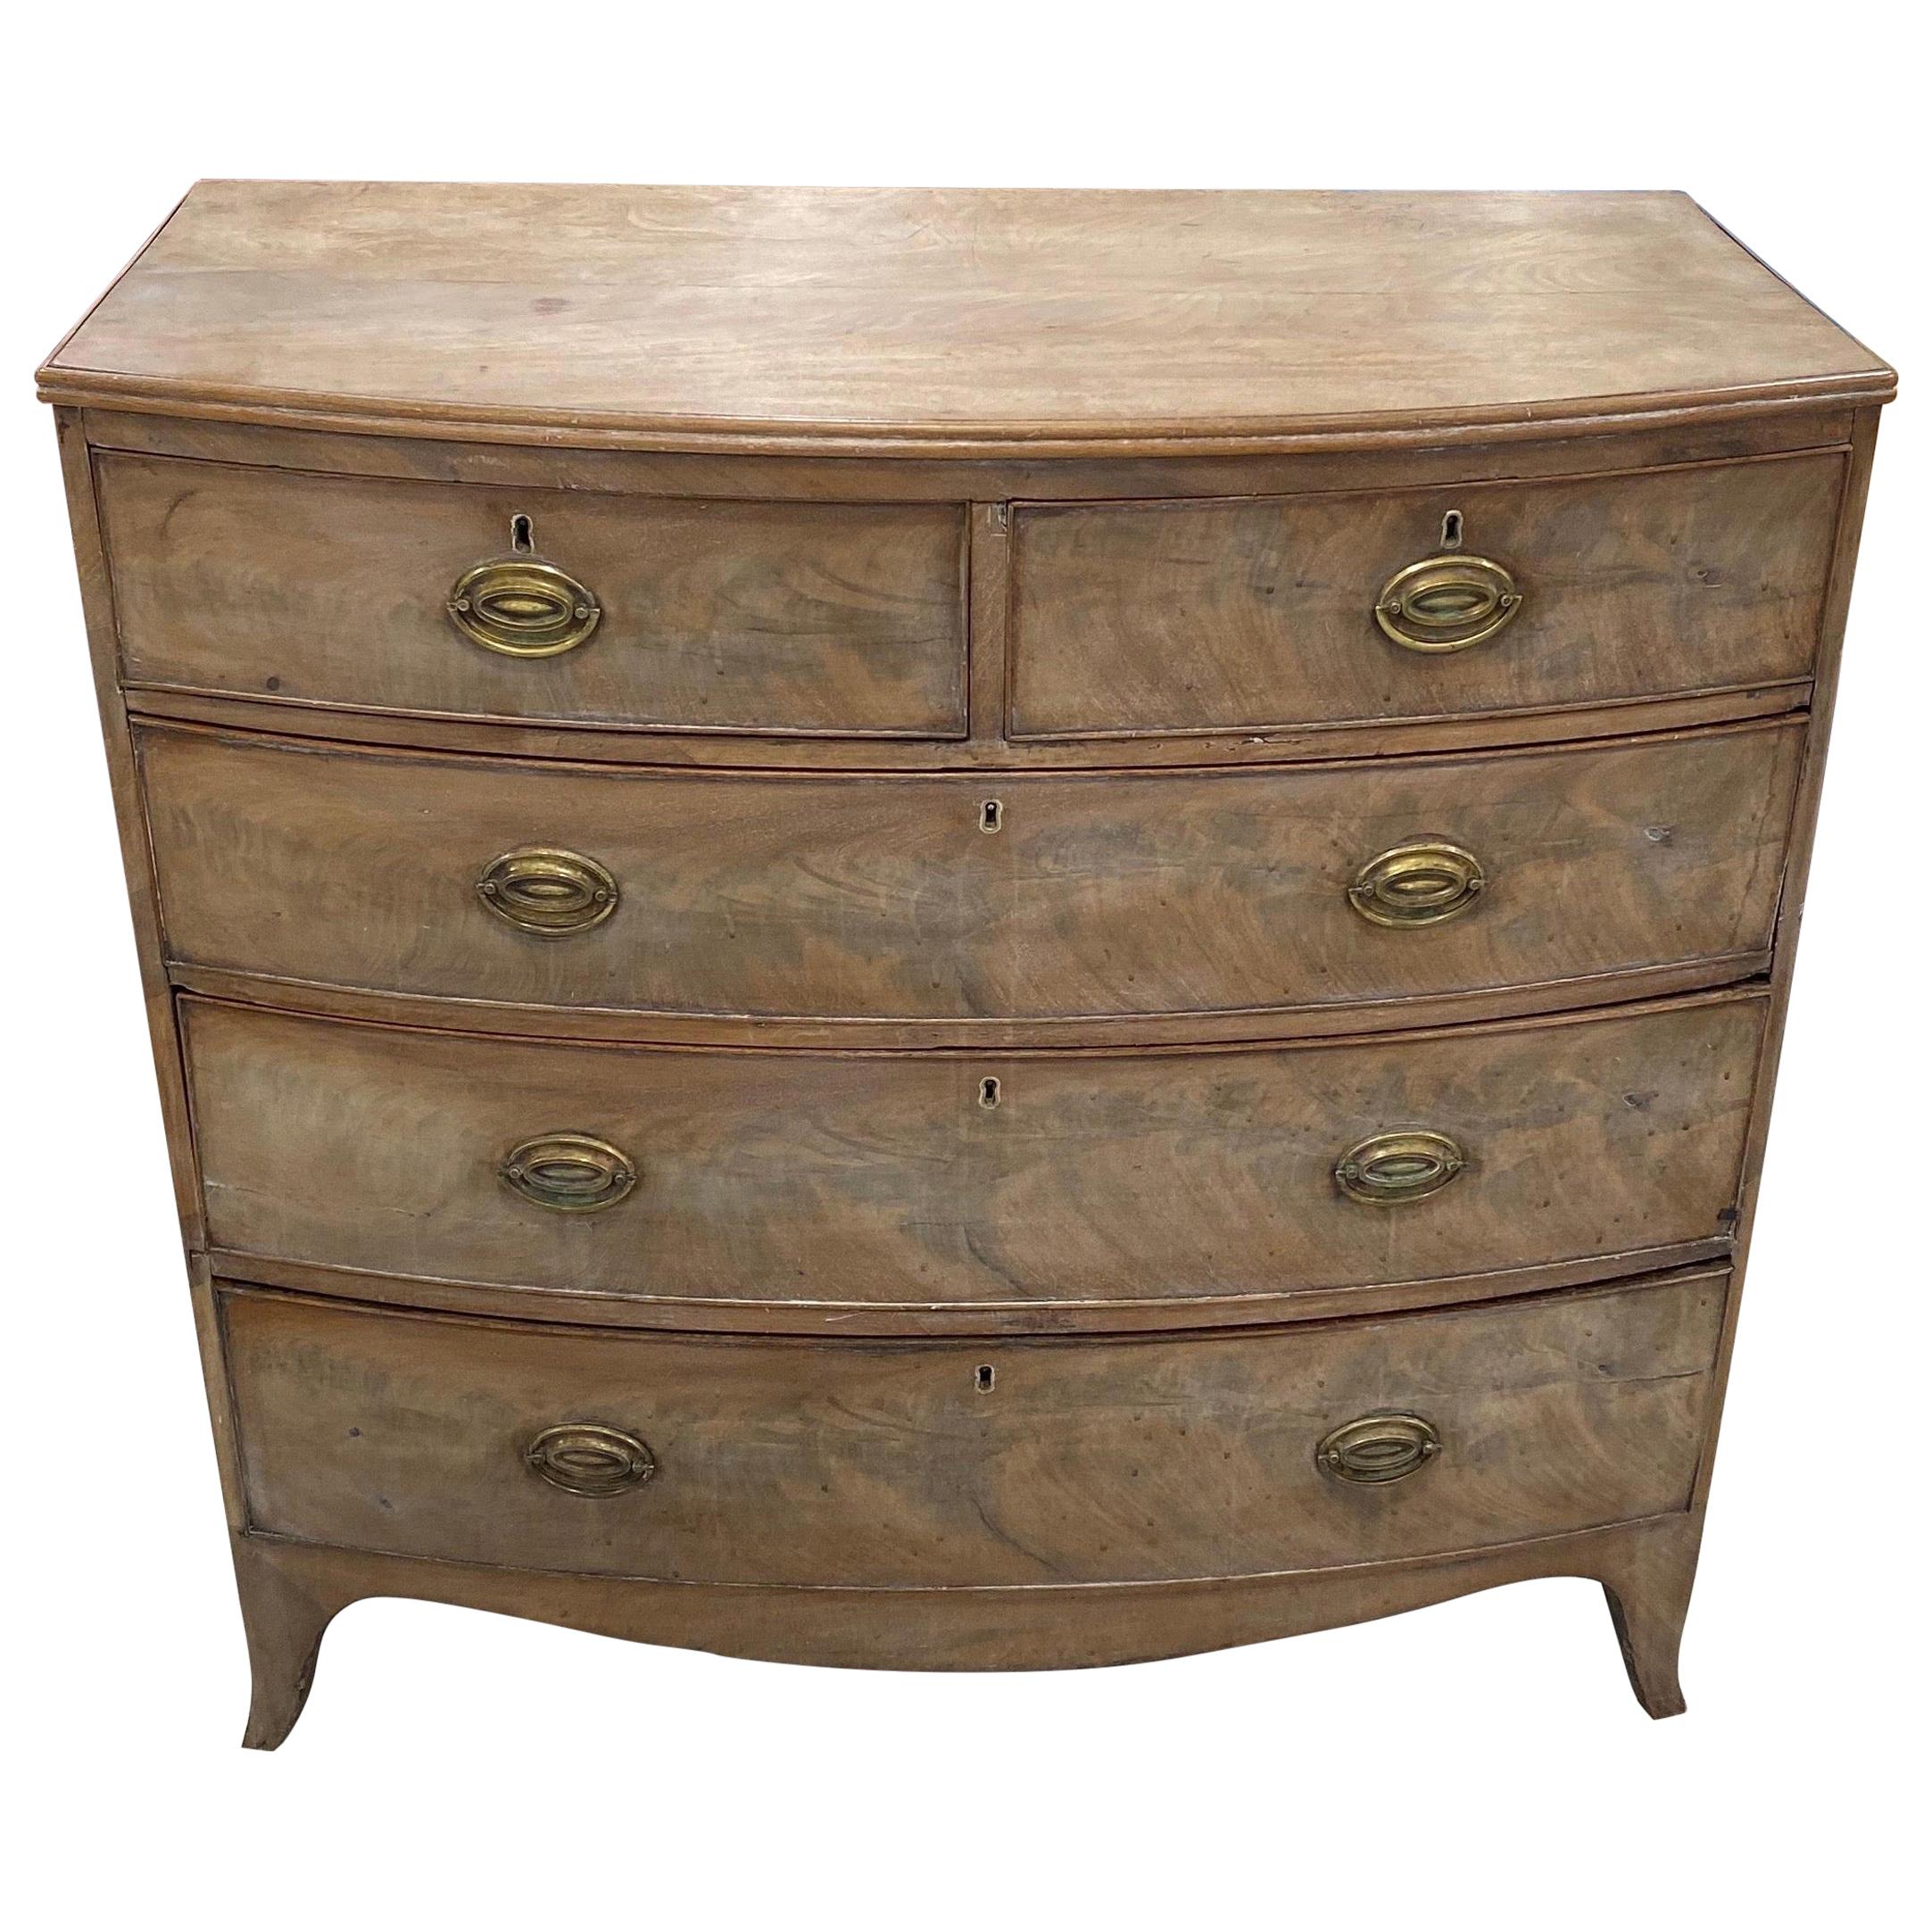 19th Century Bleached English Mahogany Bowfront Chest of Drawers